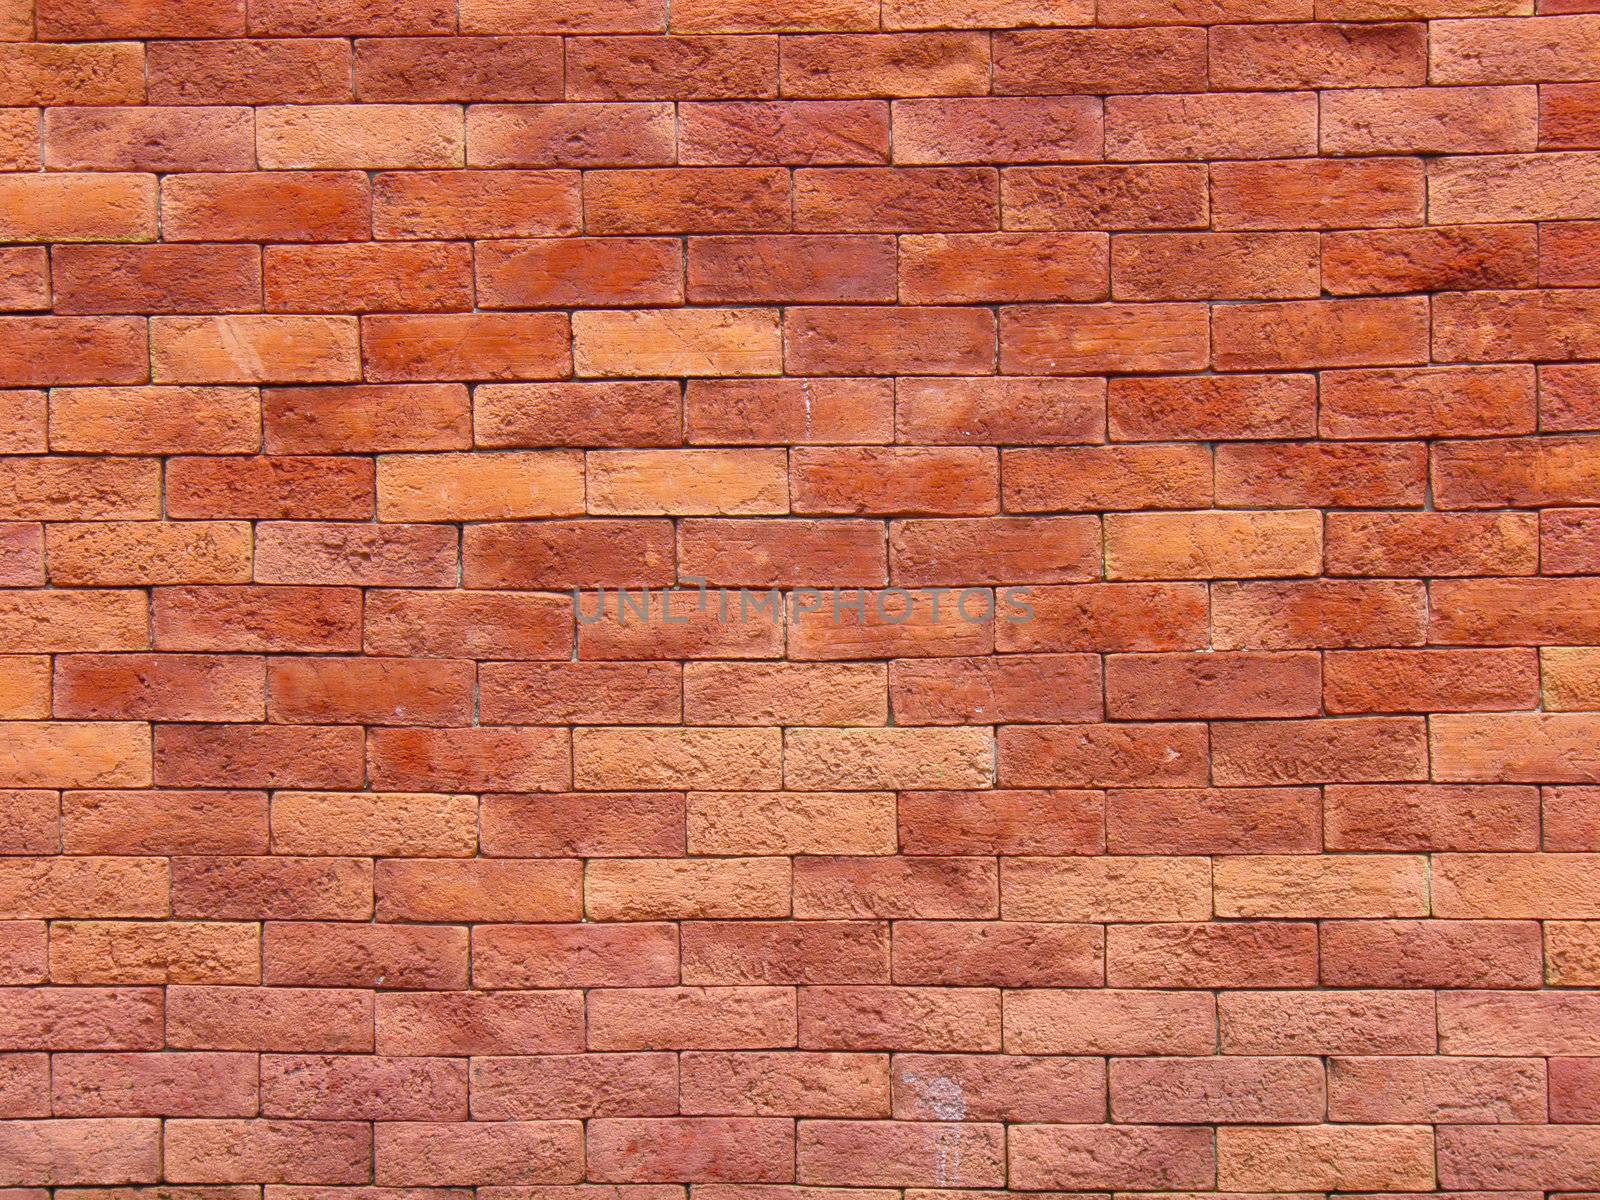 Brick wall from a new house by jconejo